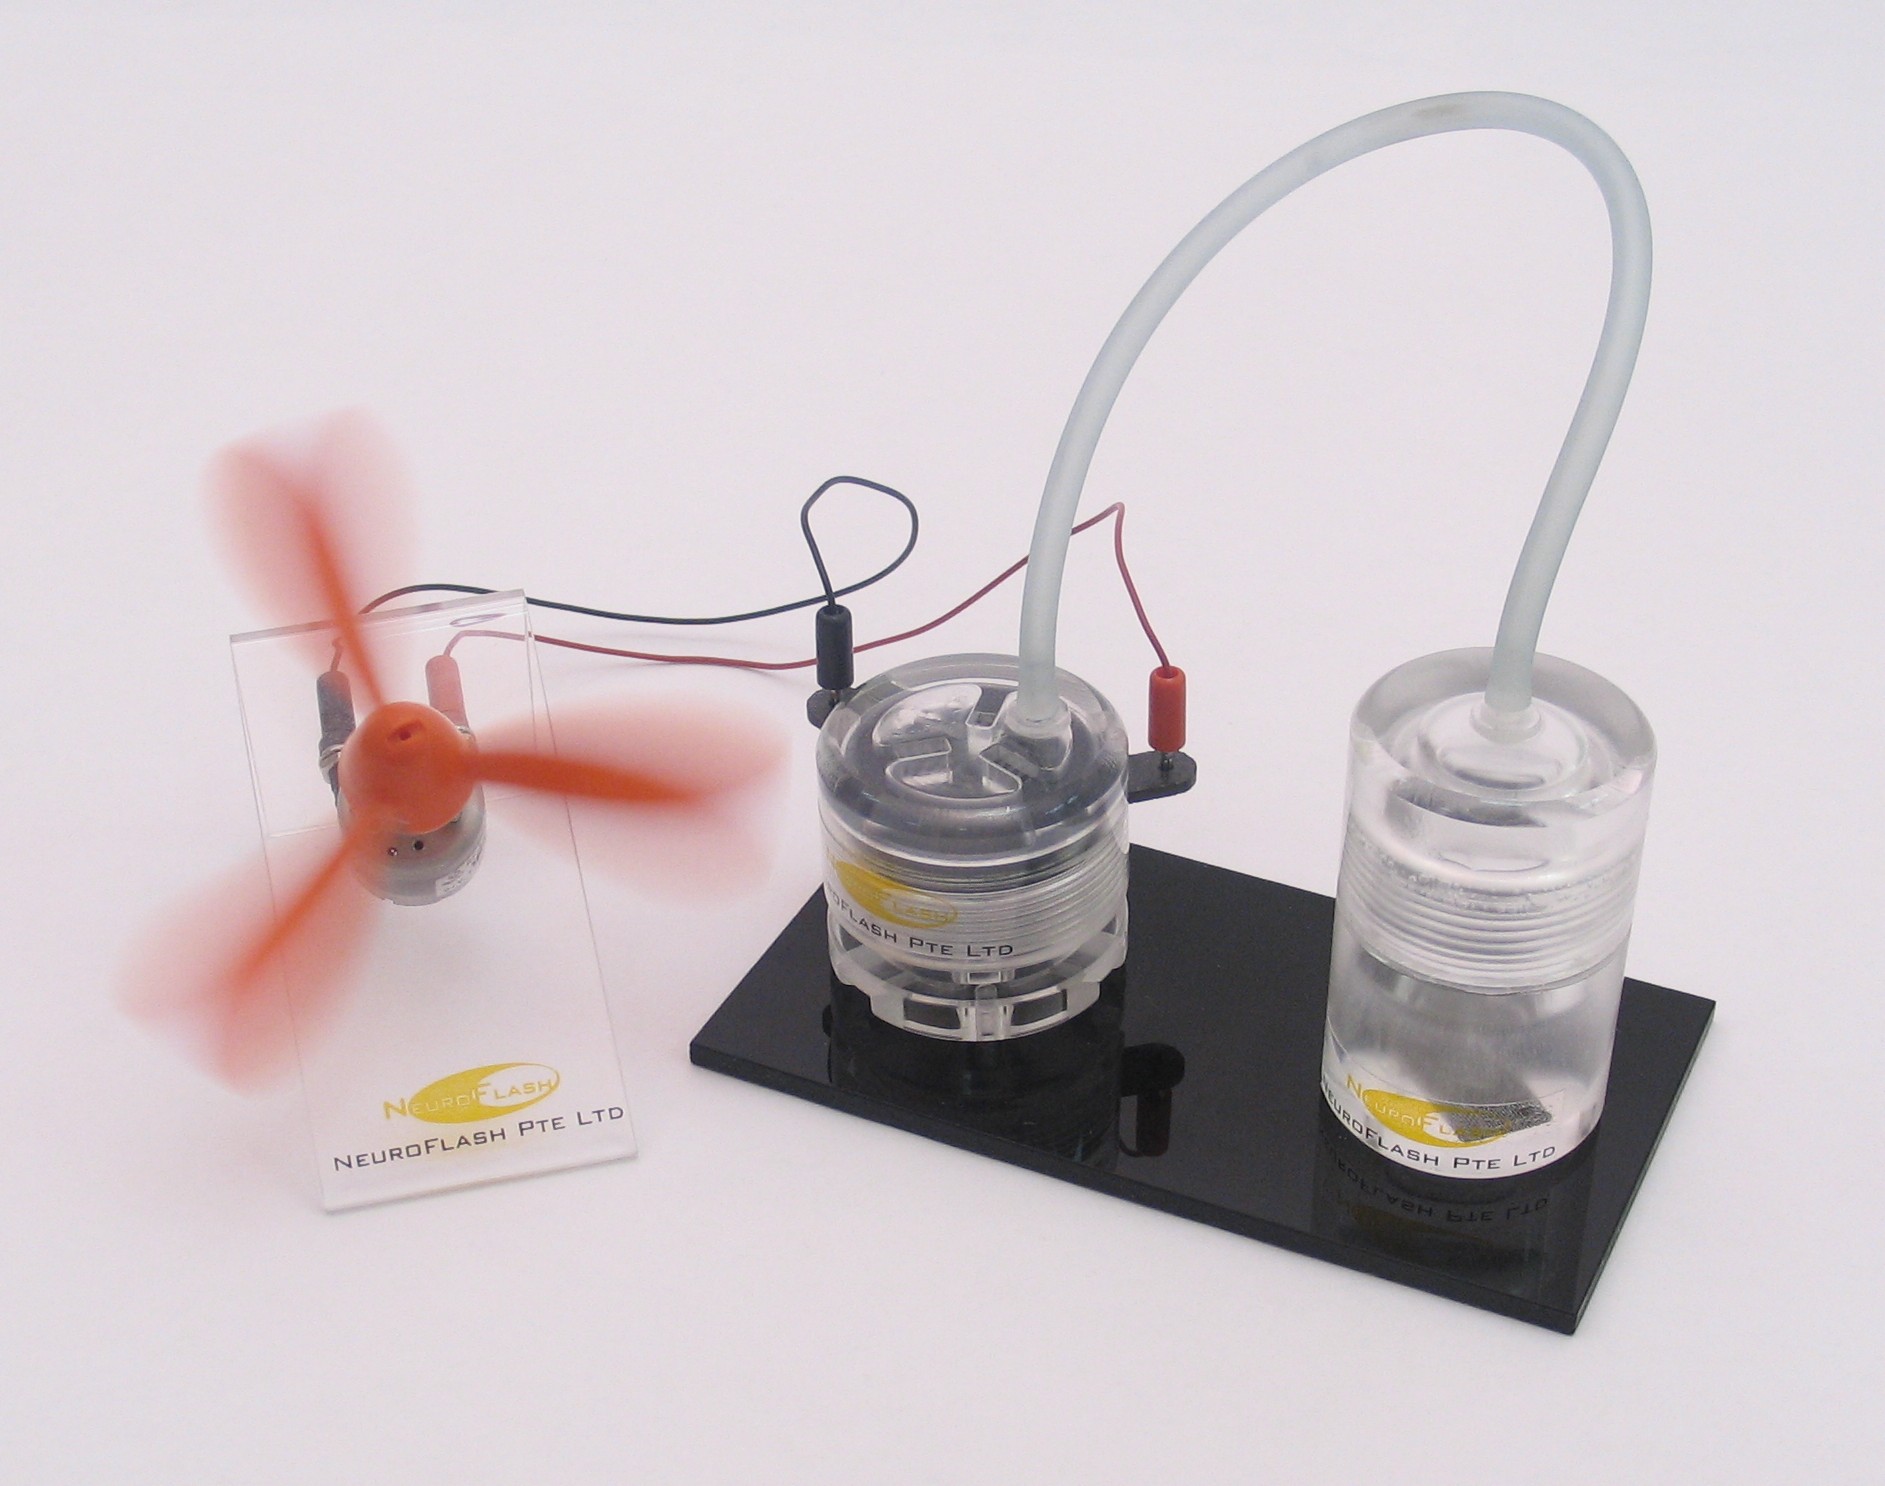 The Fuel Cell Exploratory Kit basic set consists of a single stack PEM 